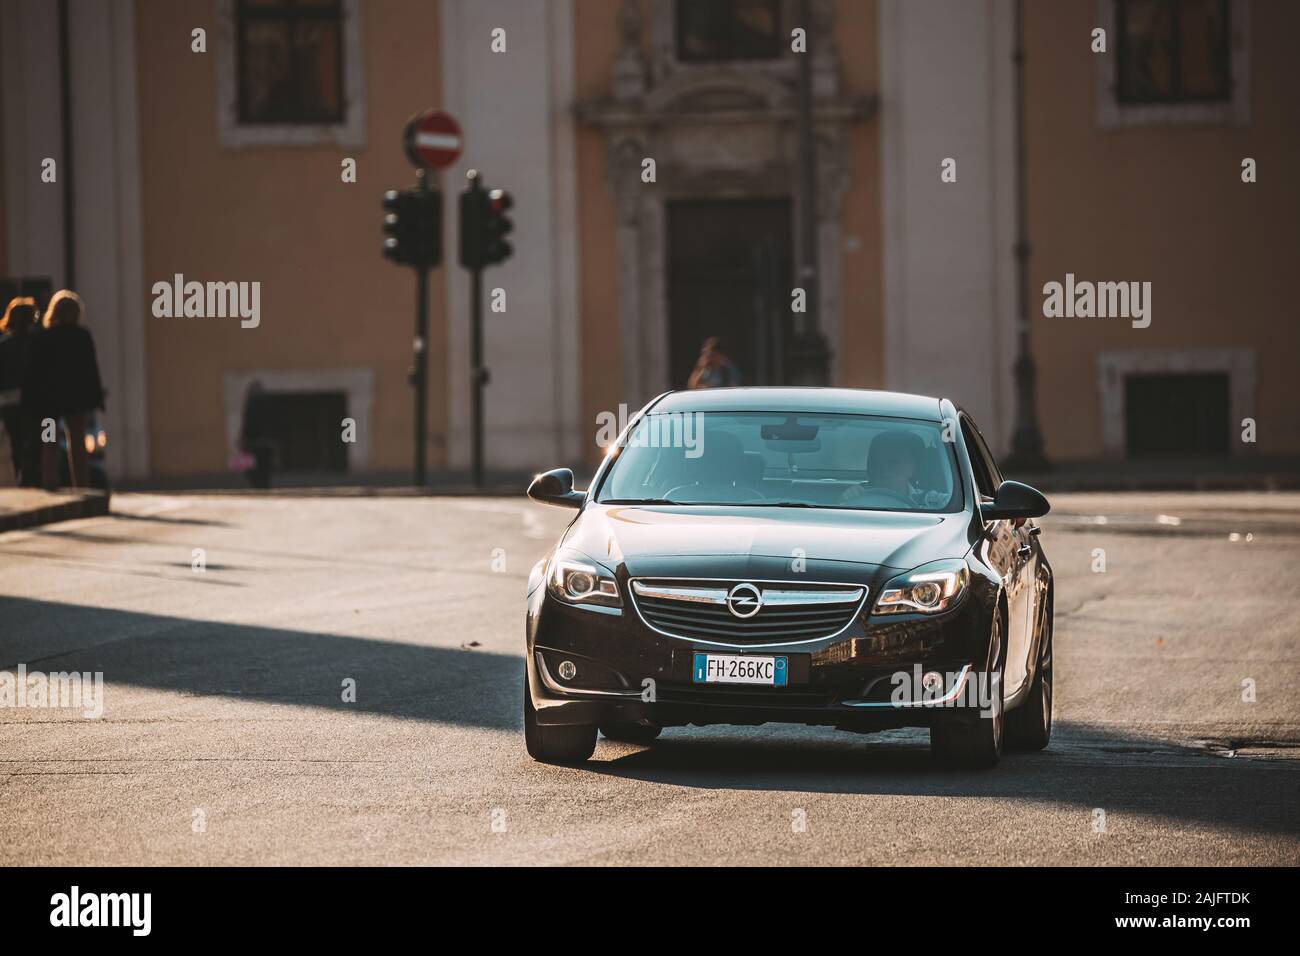 Rome, Italy - October 19, 2018: Black Color Opel Insignia With Face-lift In First Generation Moving At Street. Insignia is a family car engineered and Stock Photo